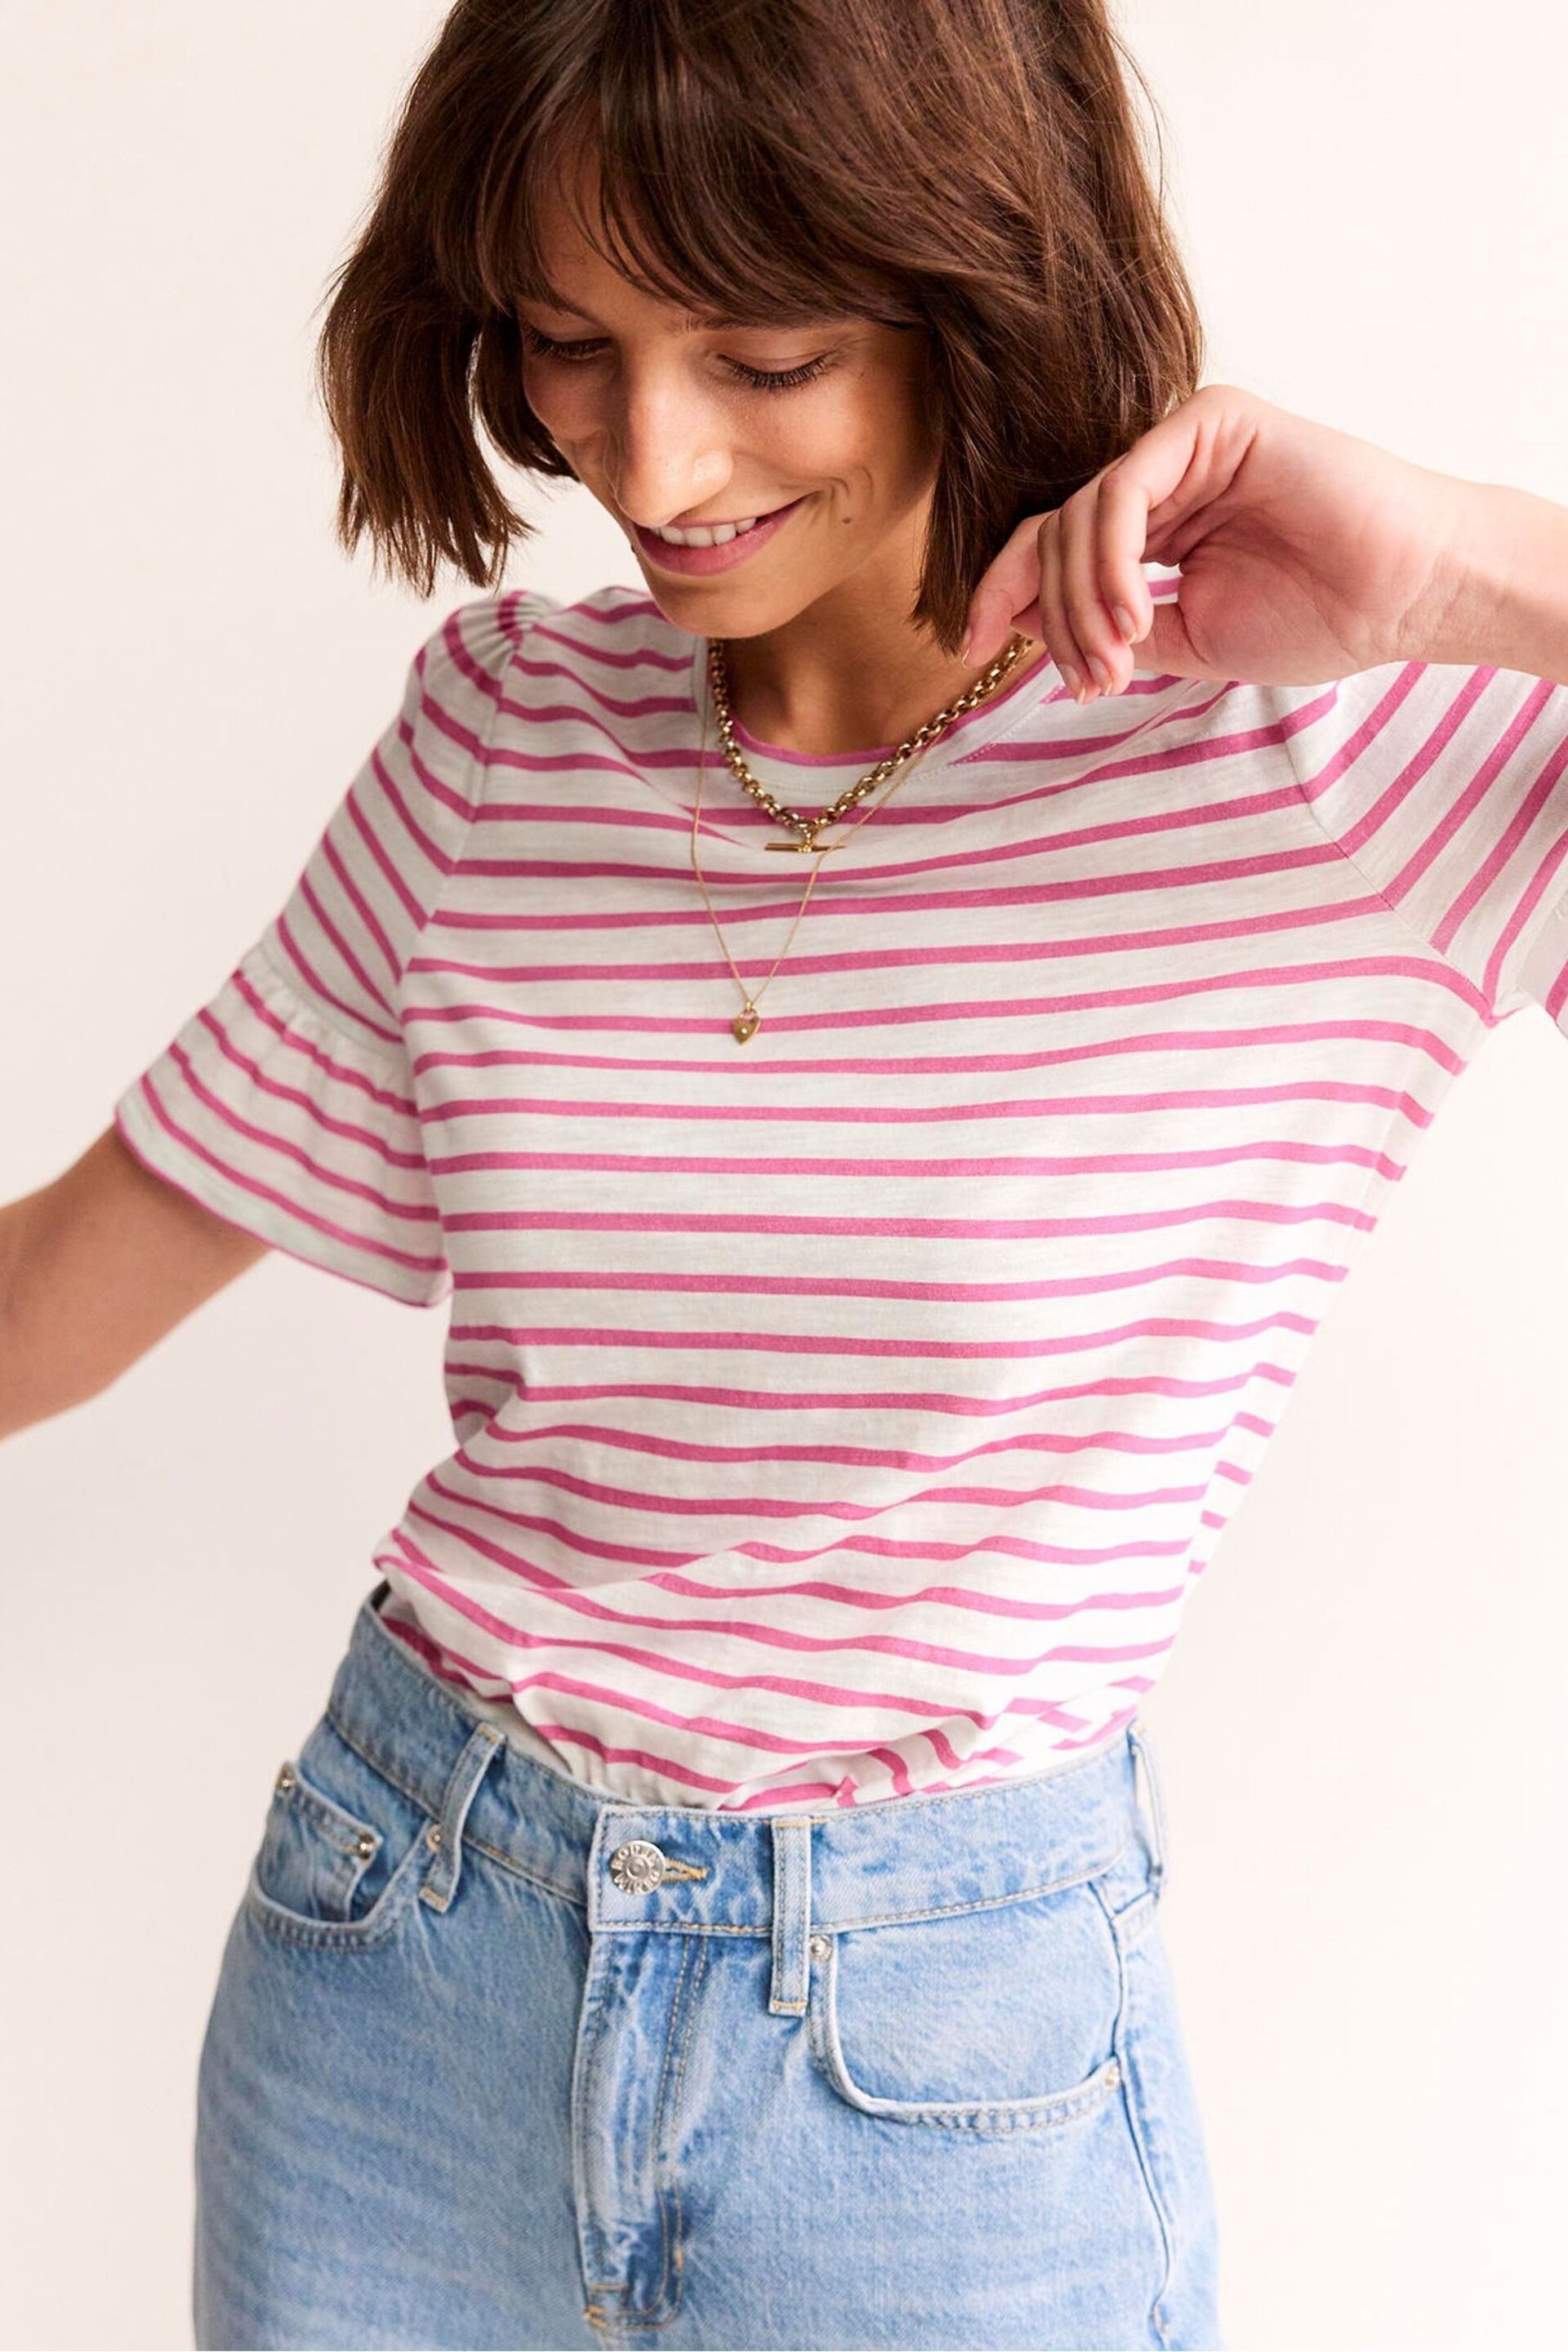 Boden Pink Crew Neck Frill Cuff T-Shirt - Image 3 of 5